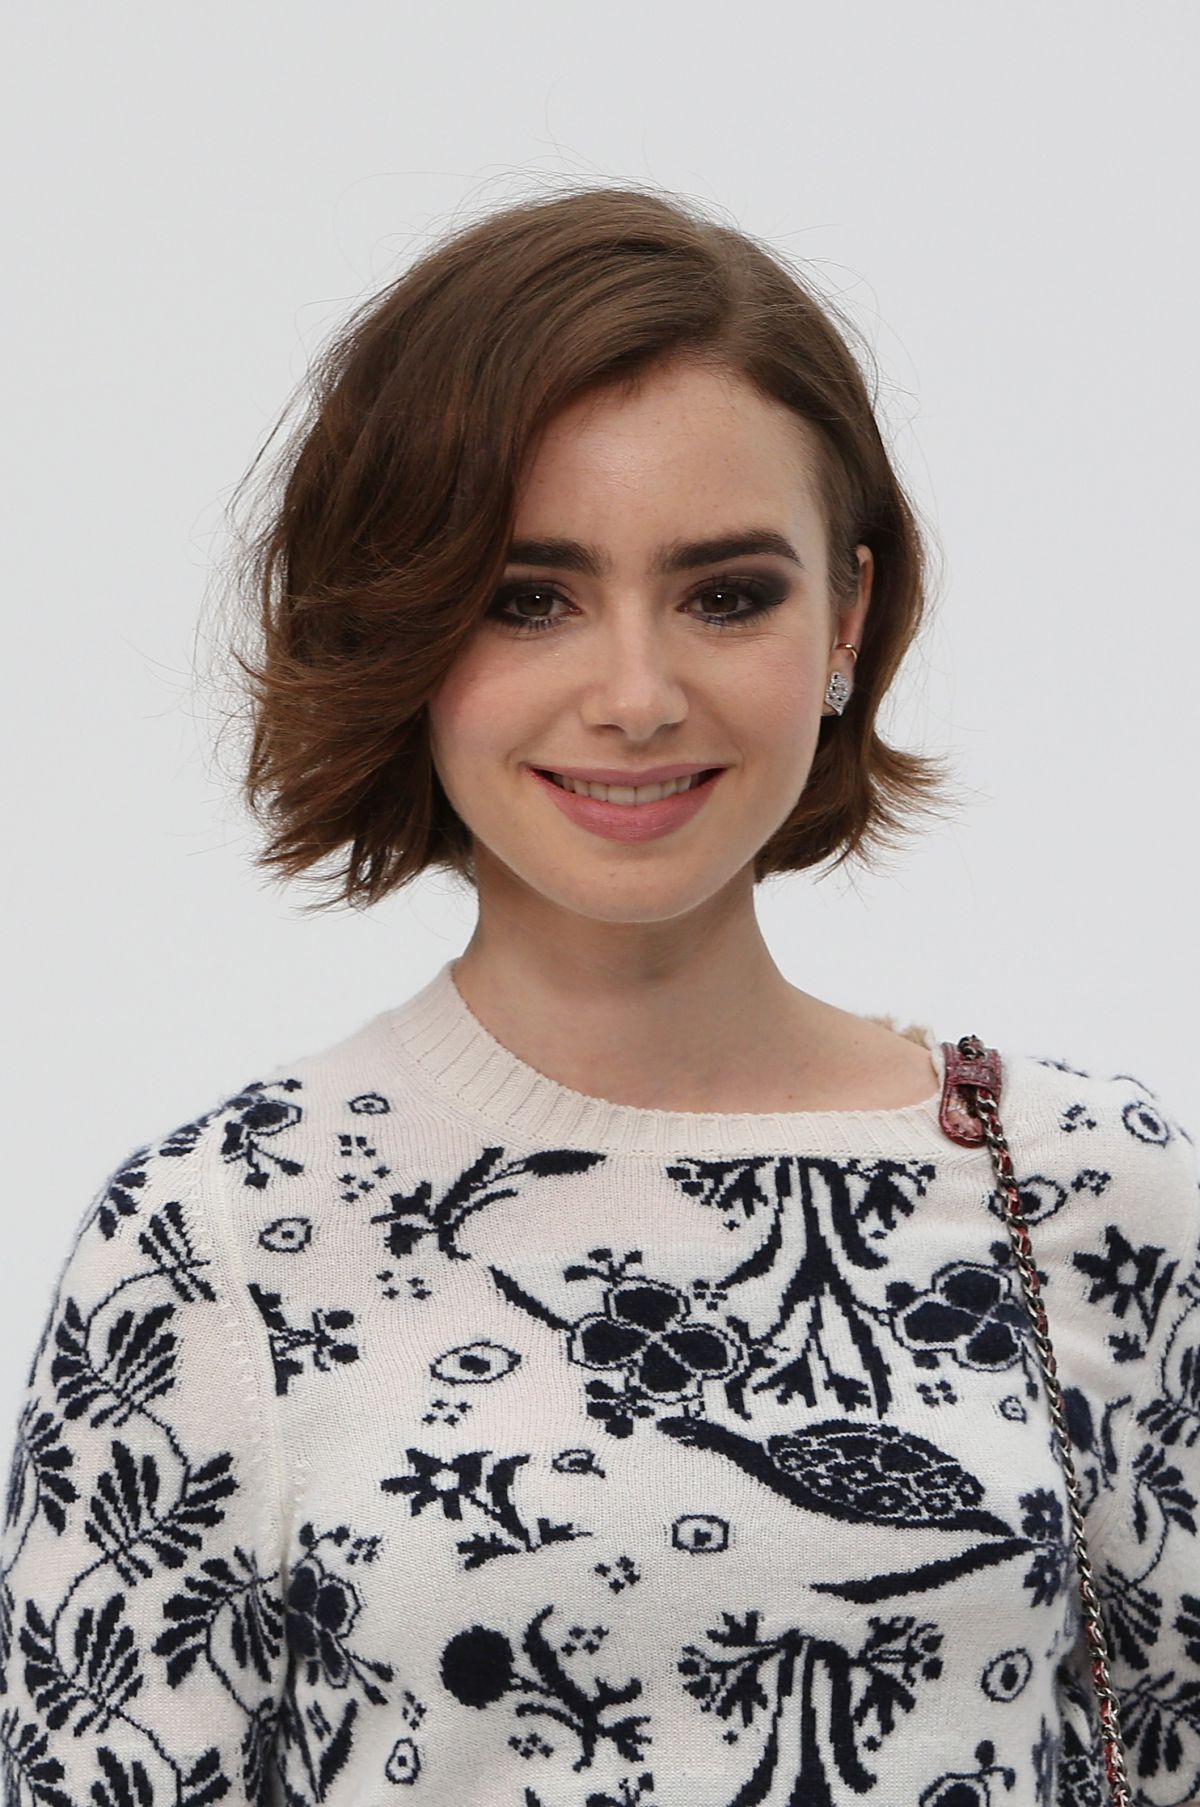 LILY COLLINS at Chanel Fashion Show in Paris 07/04/2017 – HawtCelebs